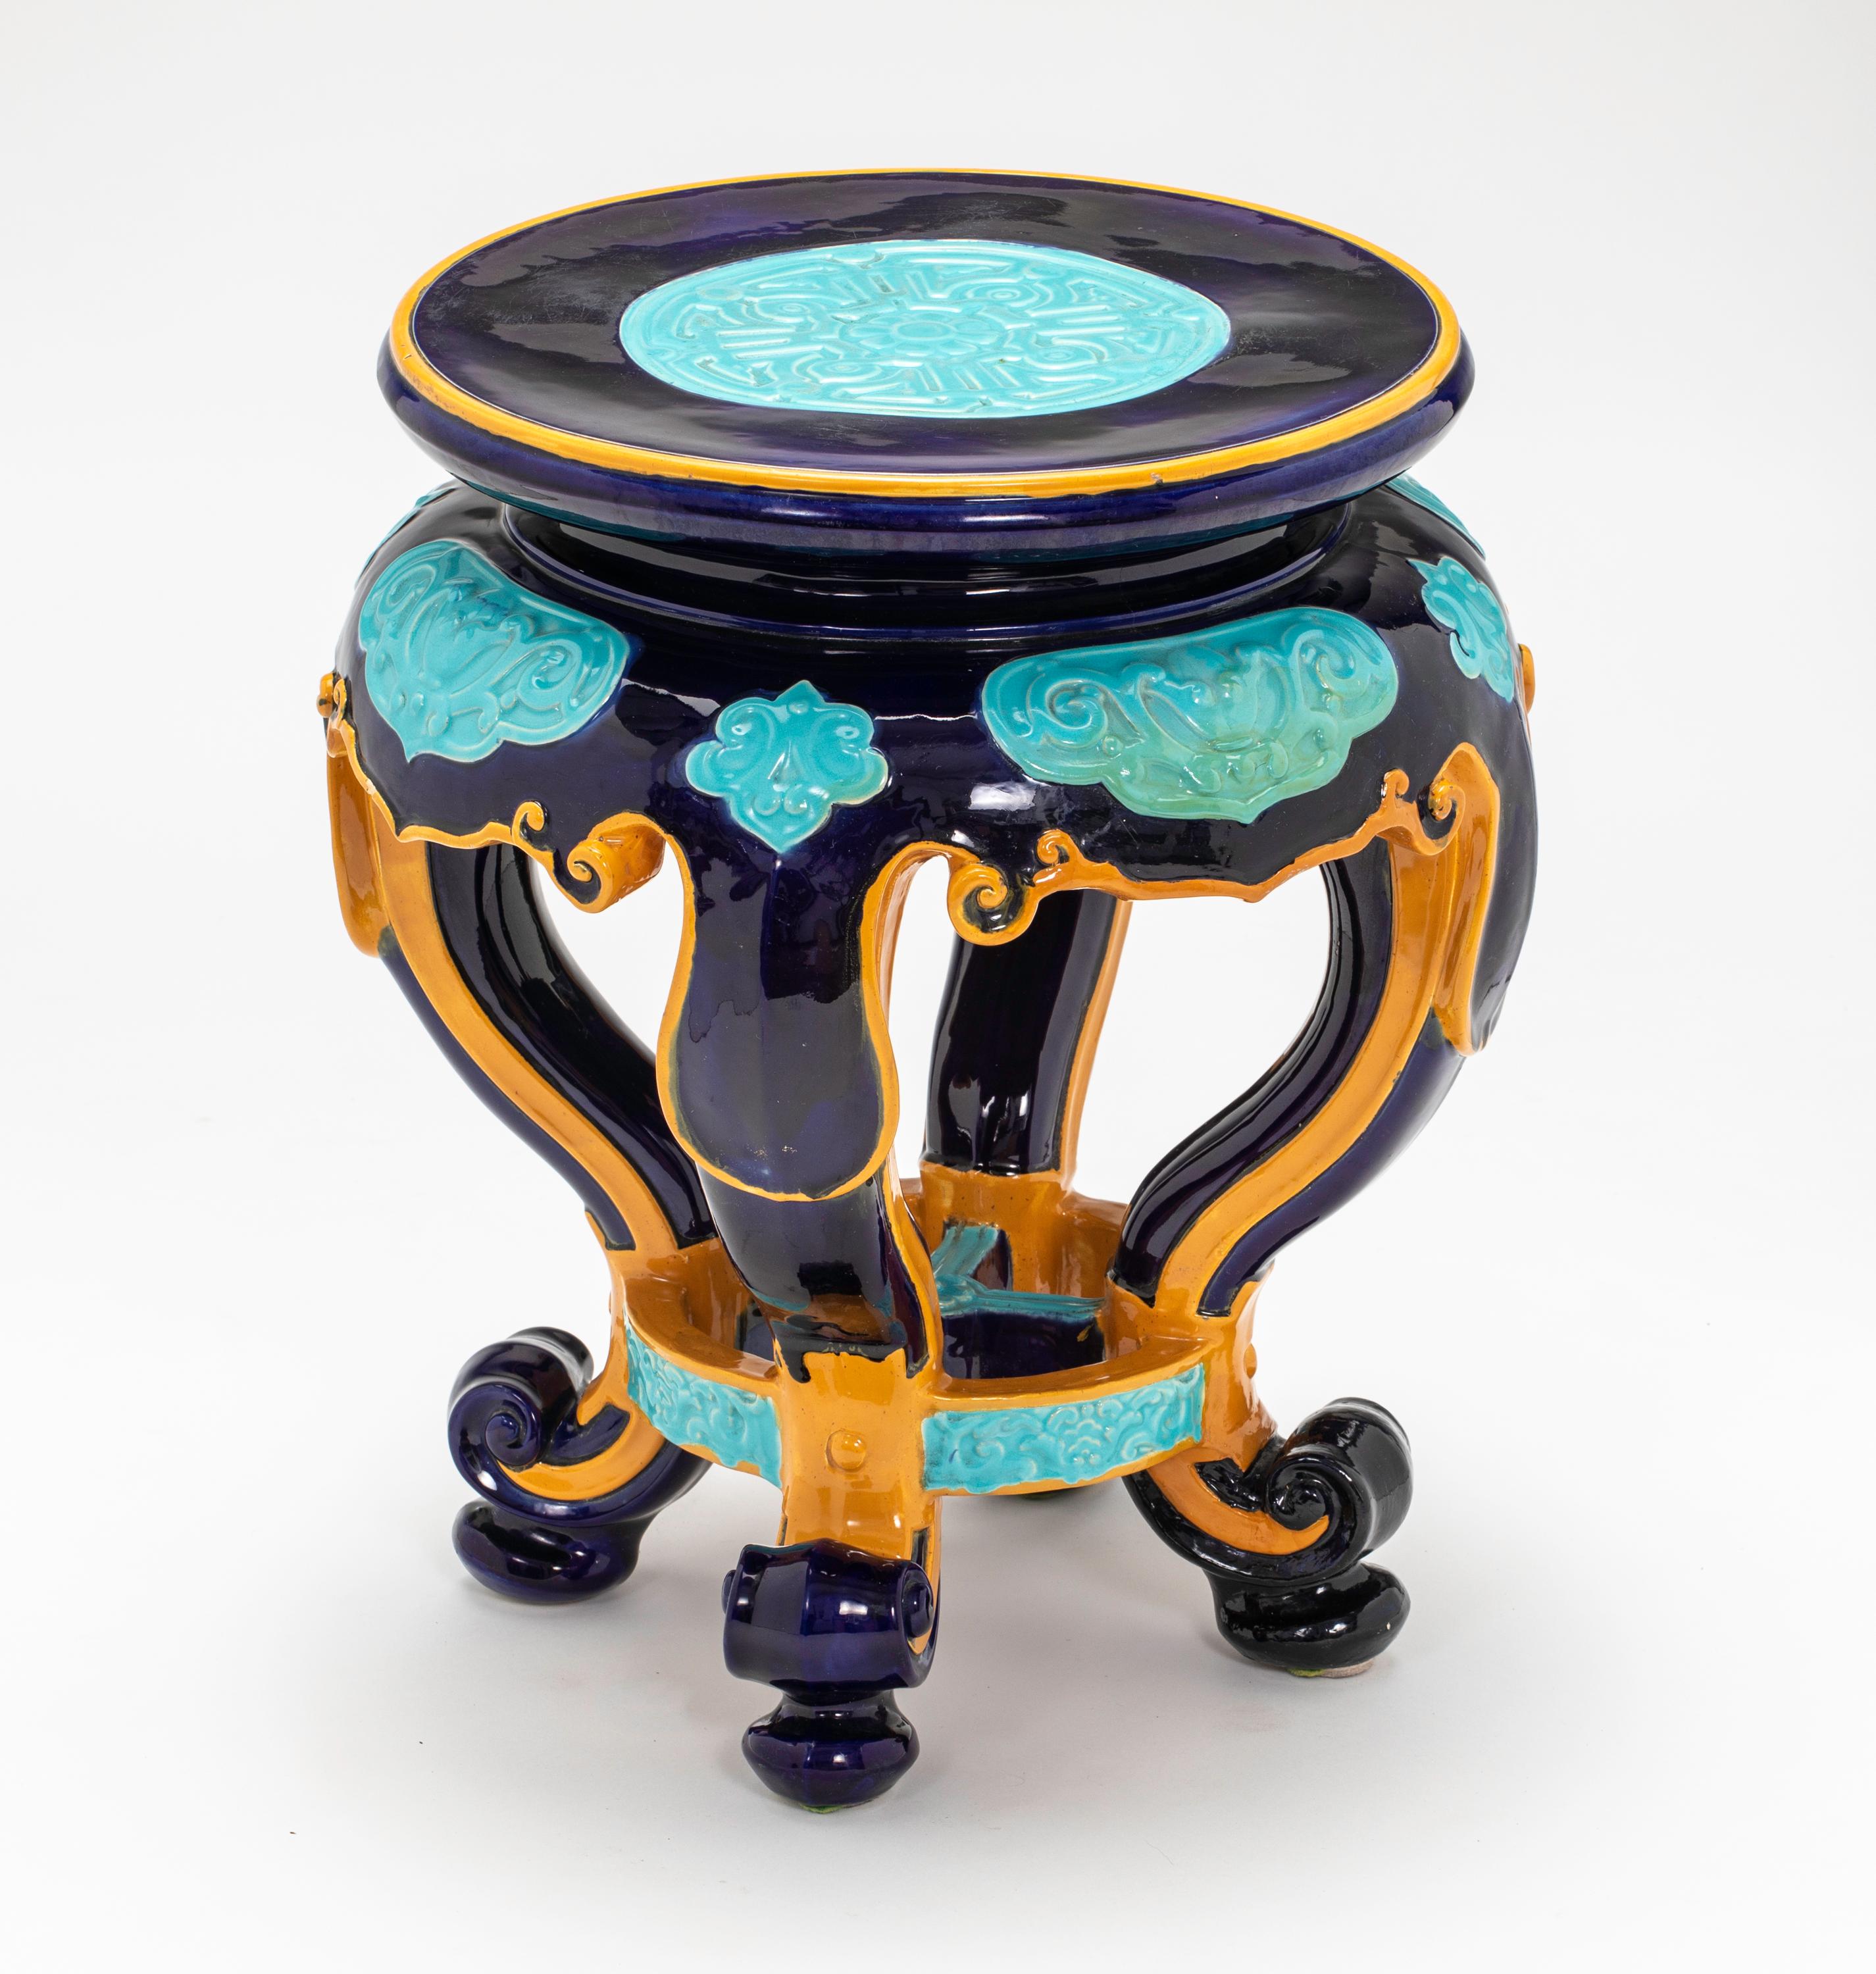 Garden Stool, Minton Majolica  In Good Condition For Sale In Summerland, CA